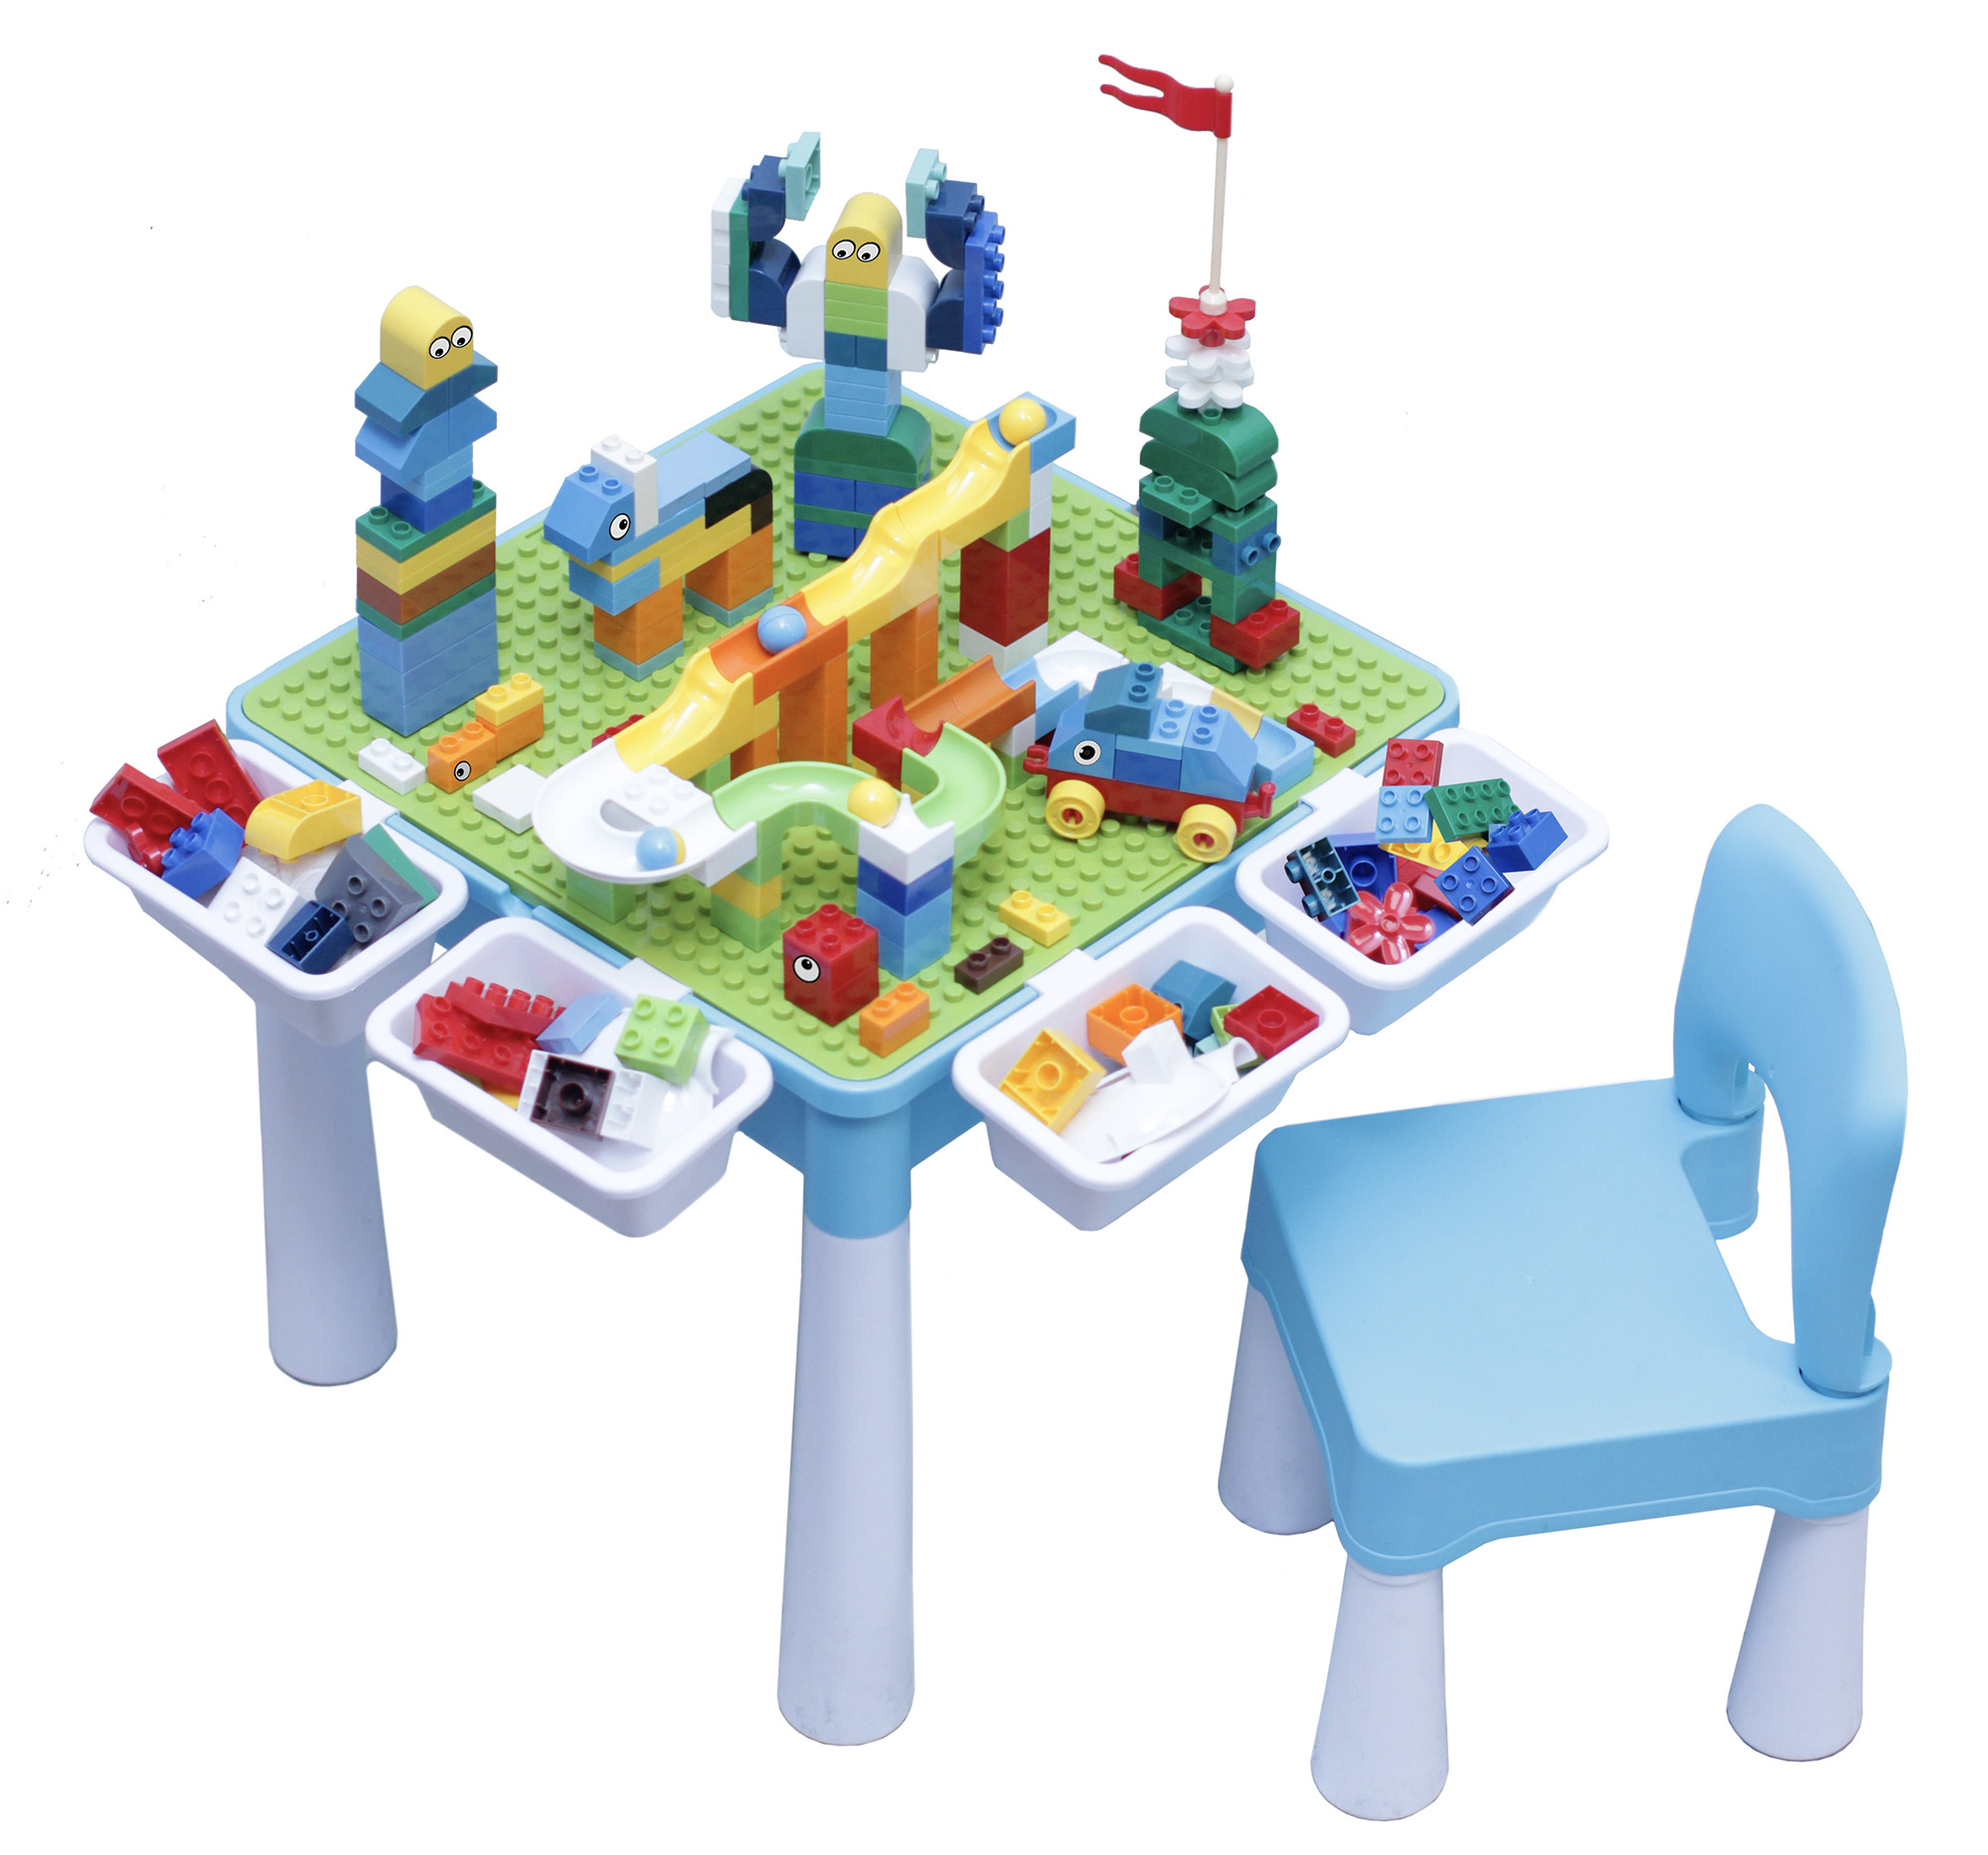 Kid's Multi-Activity Table Chair Set with 220 Pieces Brick Compatible with Lego Duplo